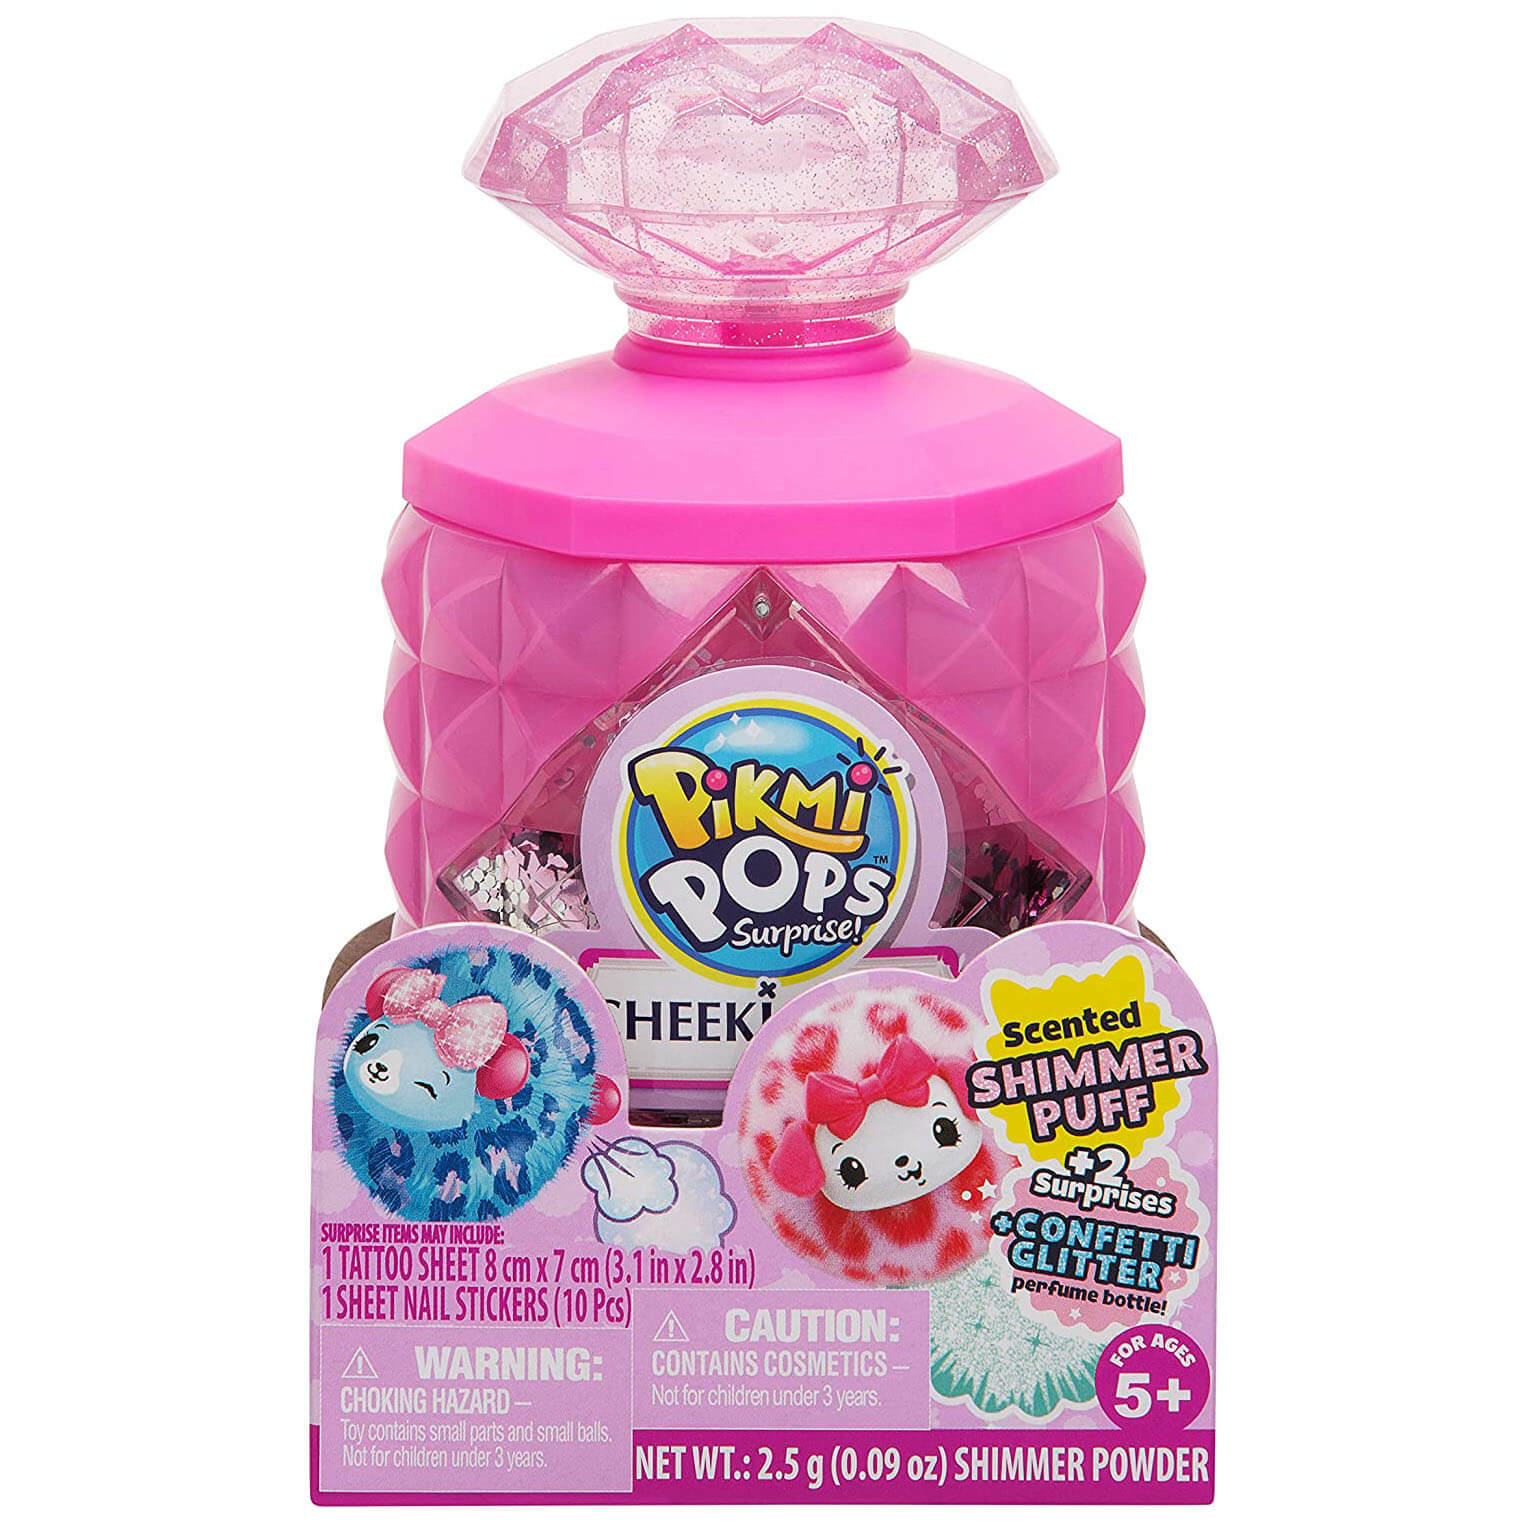 Pikmi Pops Surprise! Cheeki Puffs Scented Shimmer Powder Puff with Confetti Glitter and 2 Surprises